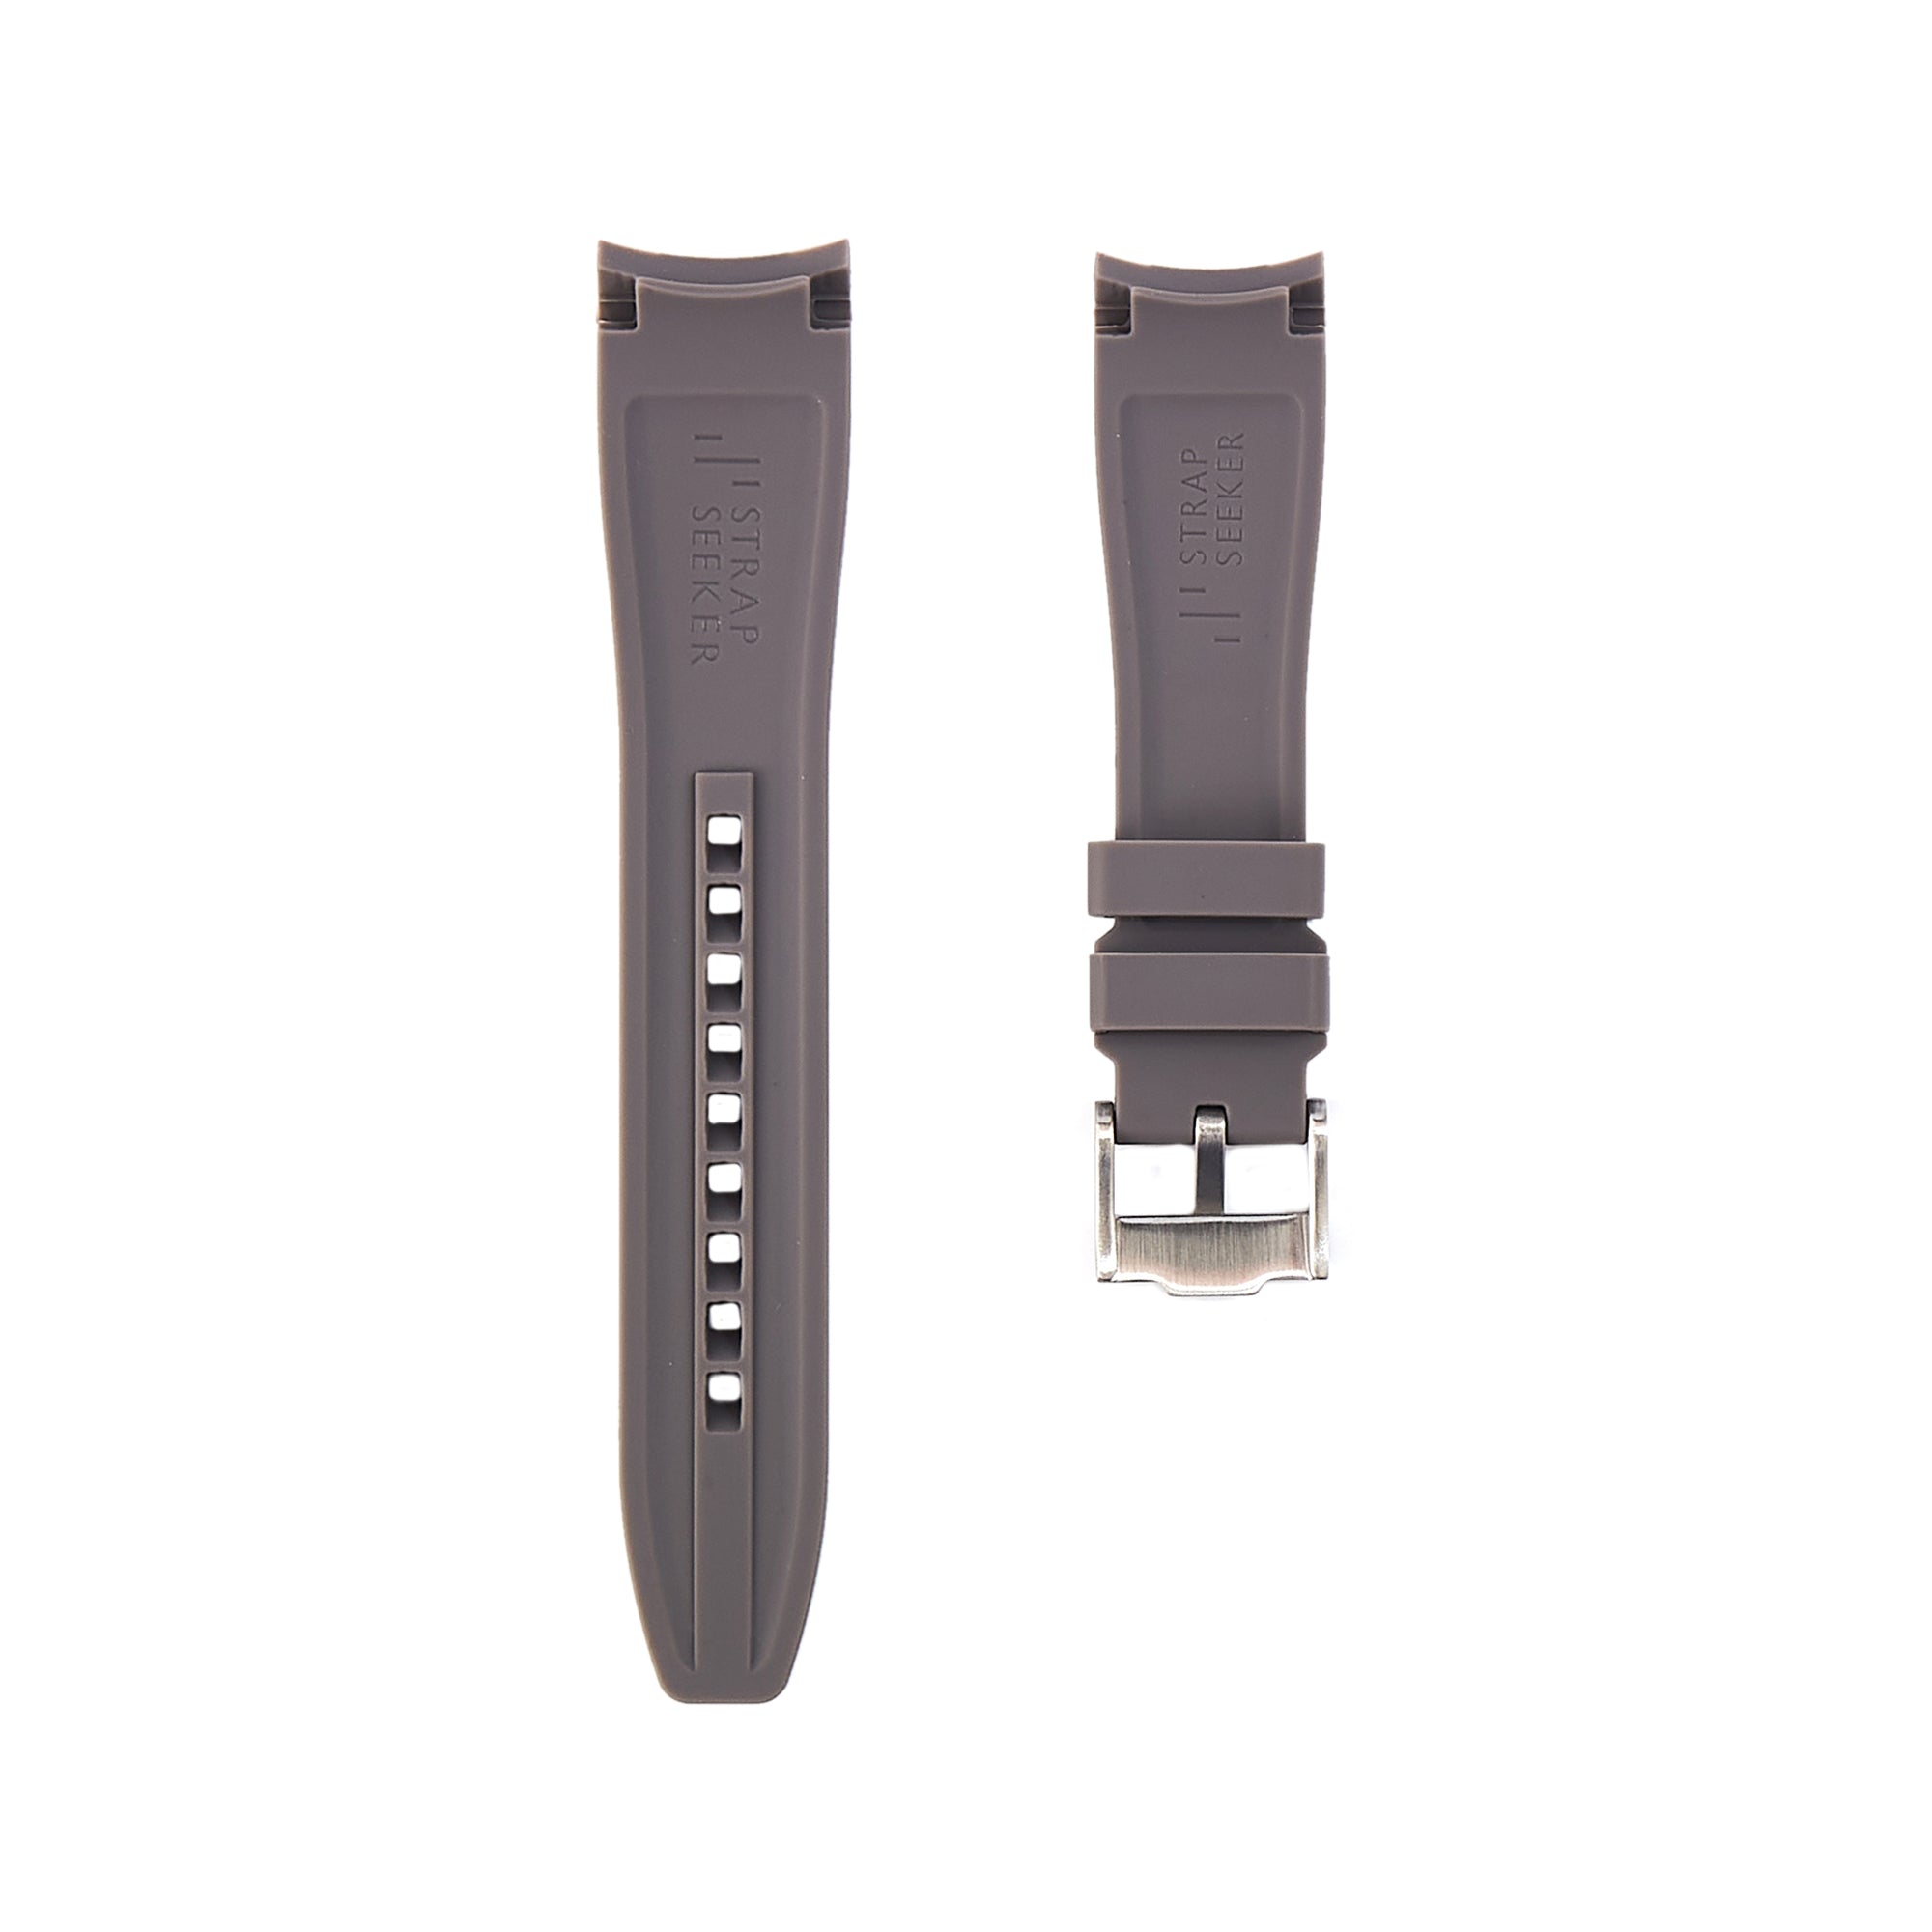 Curved End Soft Silicone Strap - Compatible with Seiko SRPD – Grey (2418) -StrapSeeker